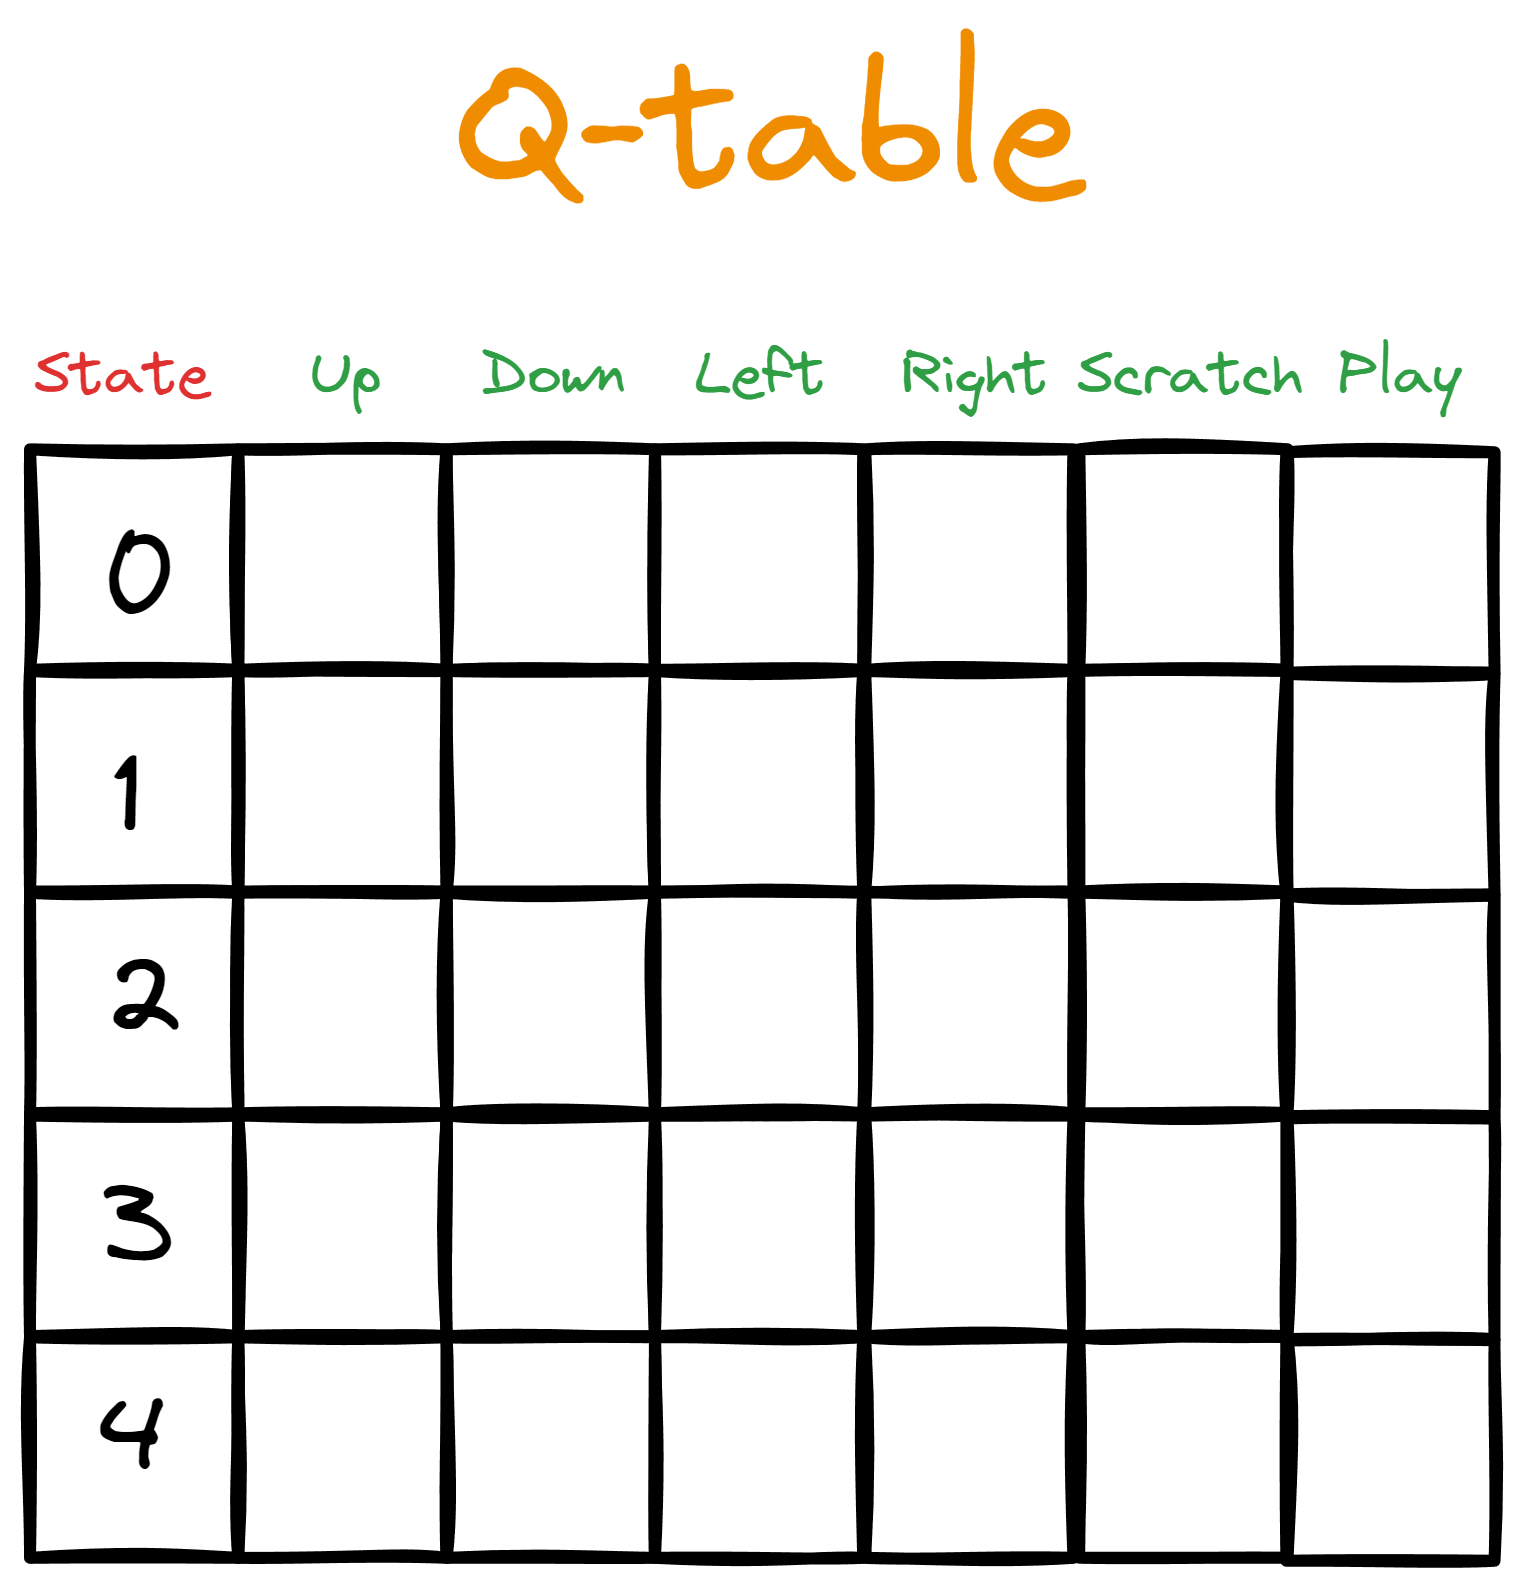 A q-table that is used to guide the actions of an agent. Q-table is integral to Q-learning algorithm of reinforcement learning.